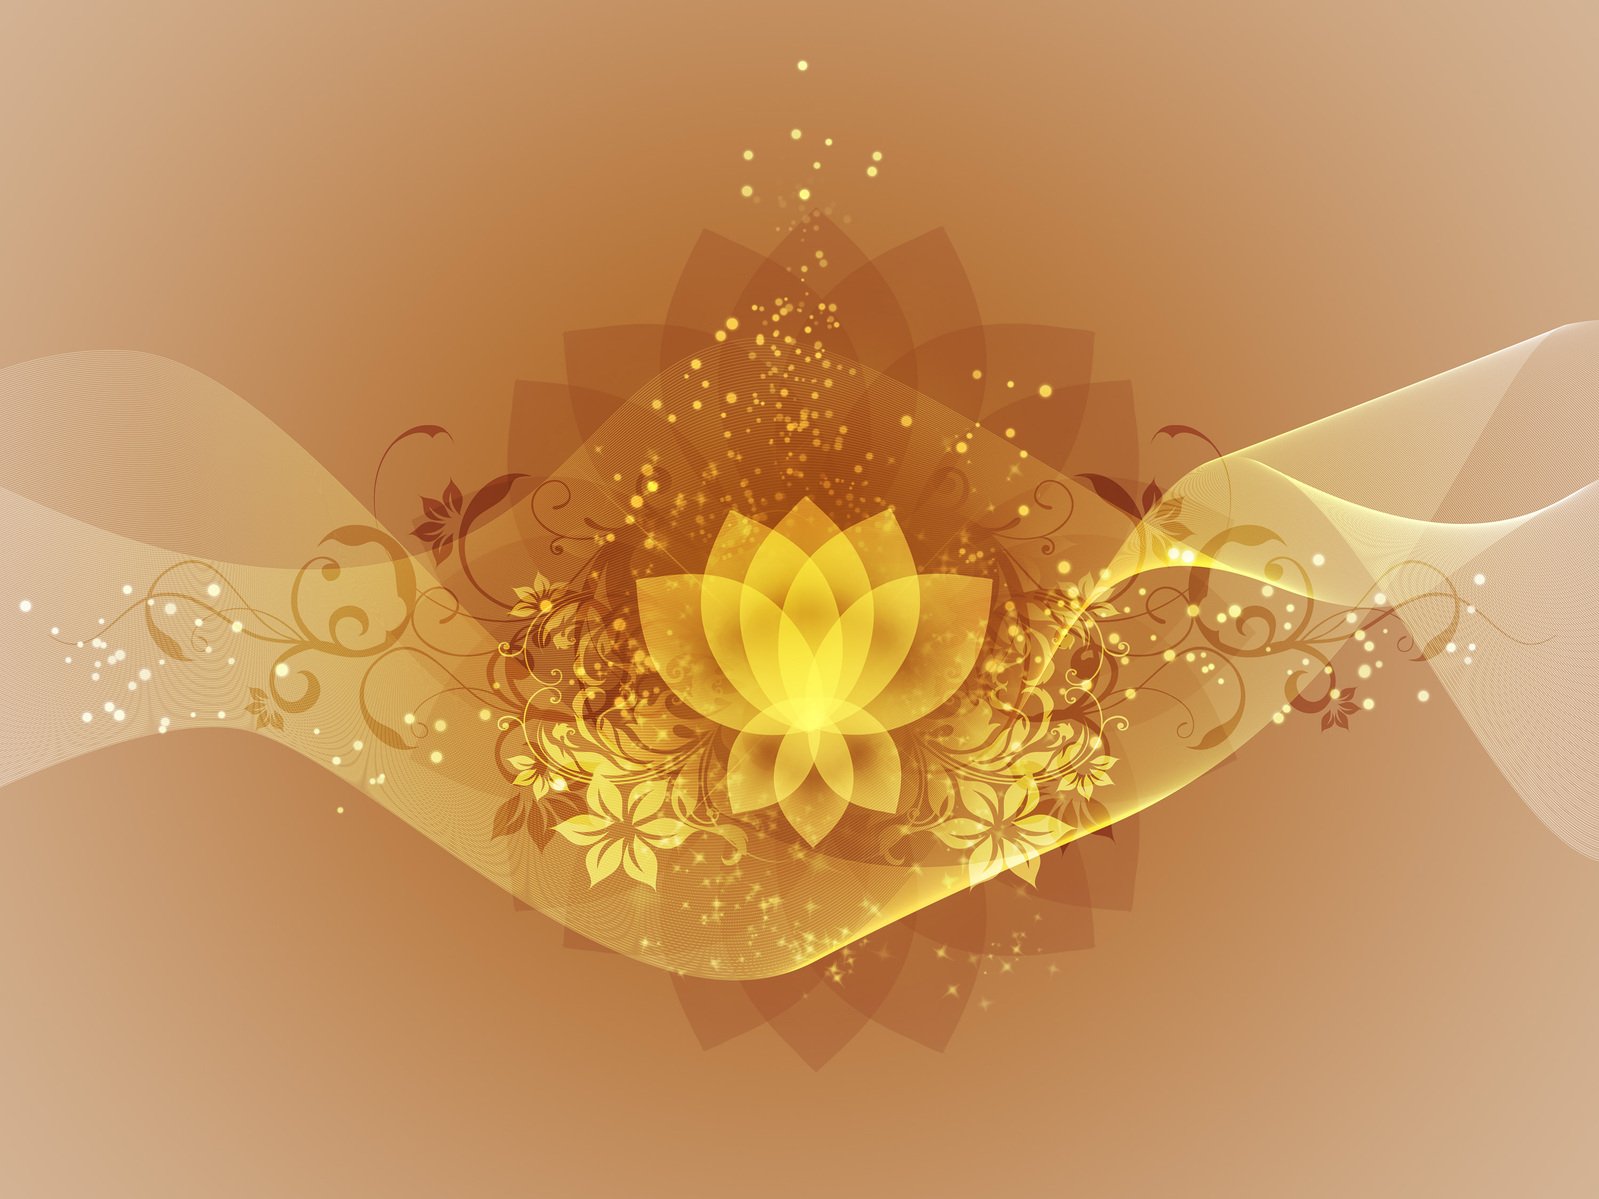 an orange background with golden flowers and swirls